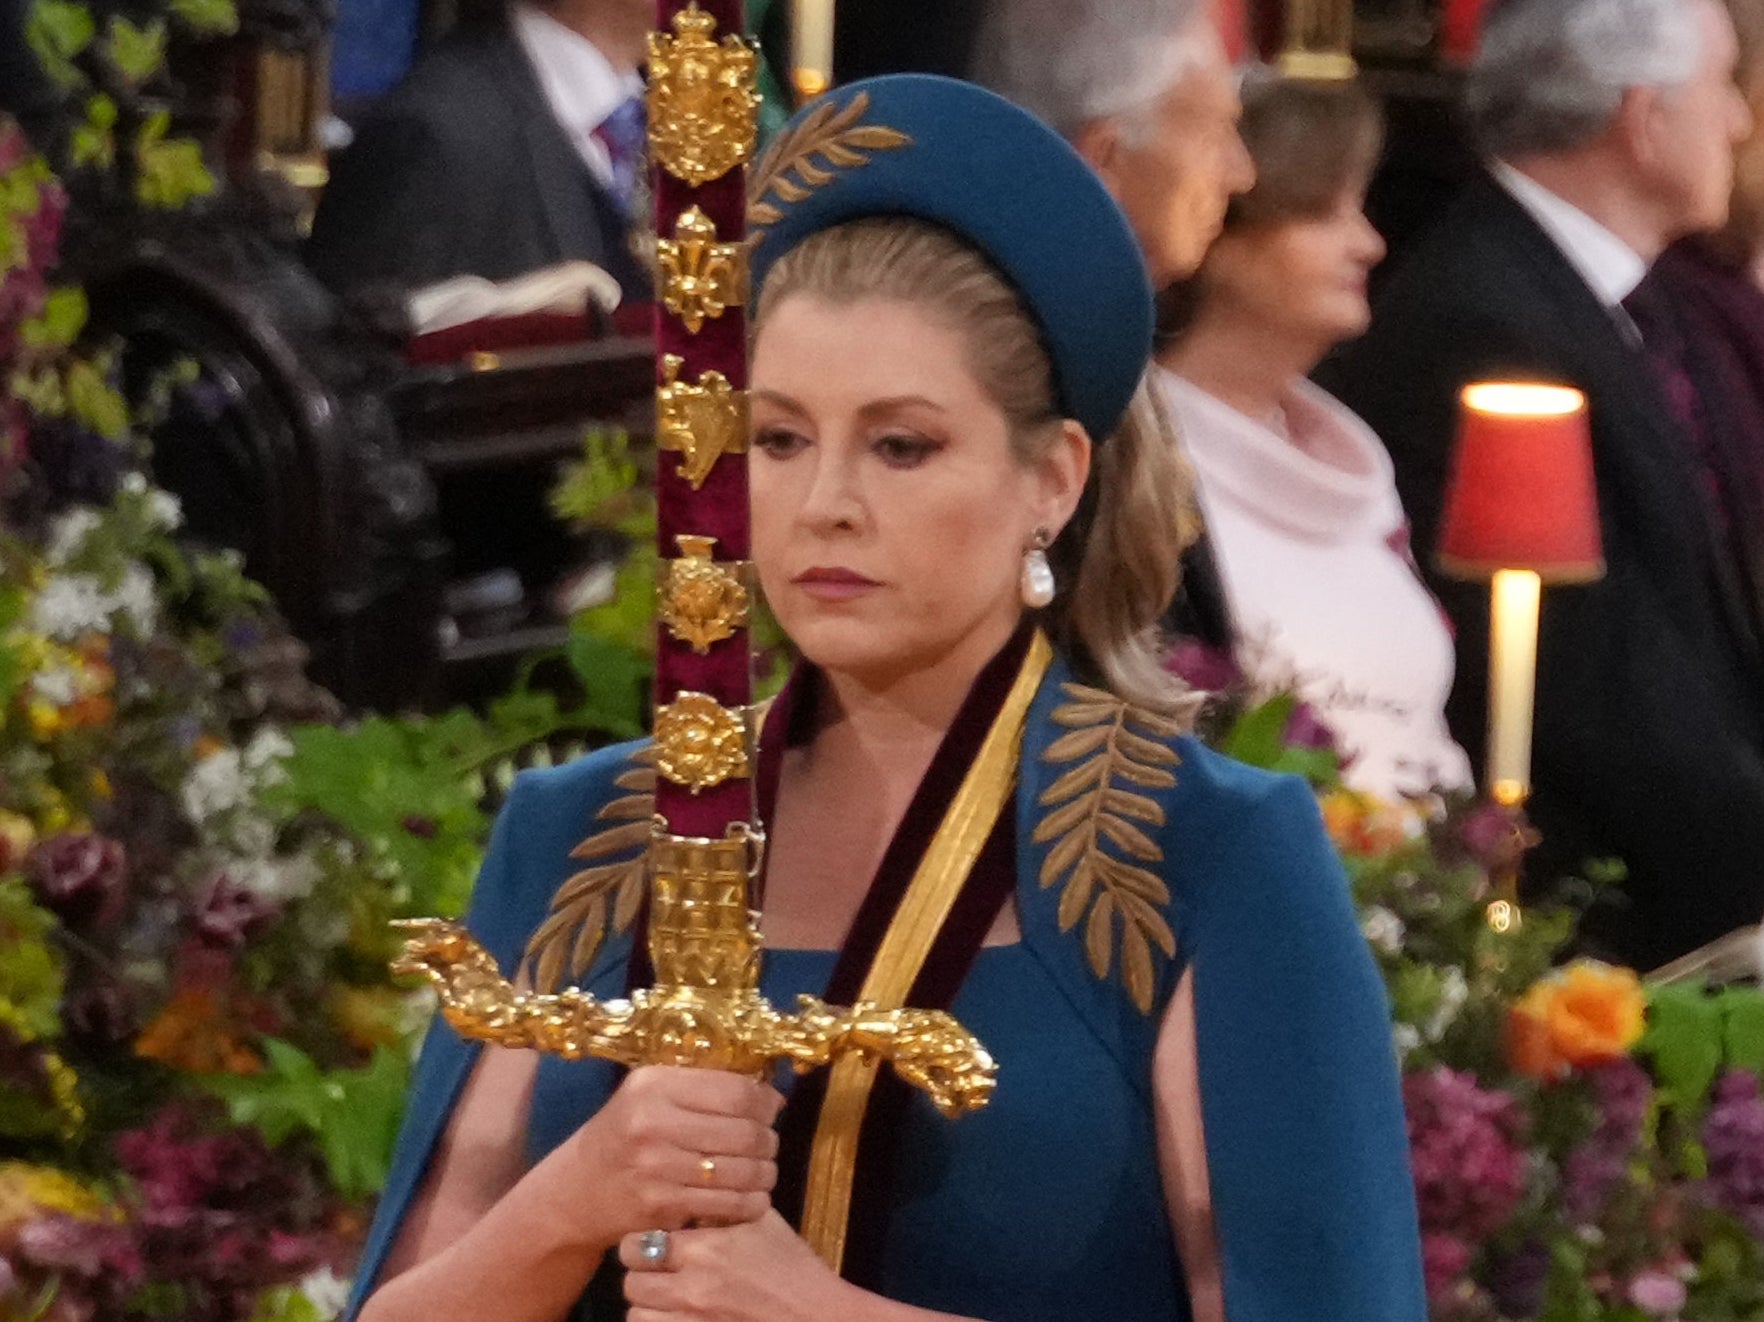 Mordaunt carrying the sword during King Charles’s coronation